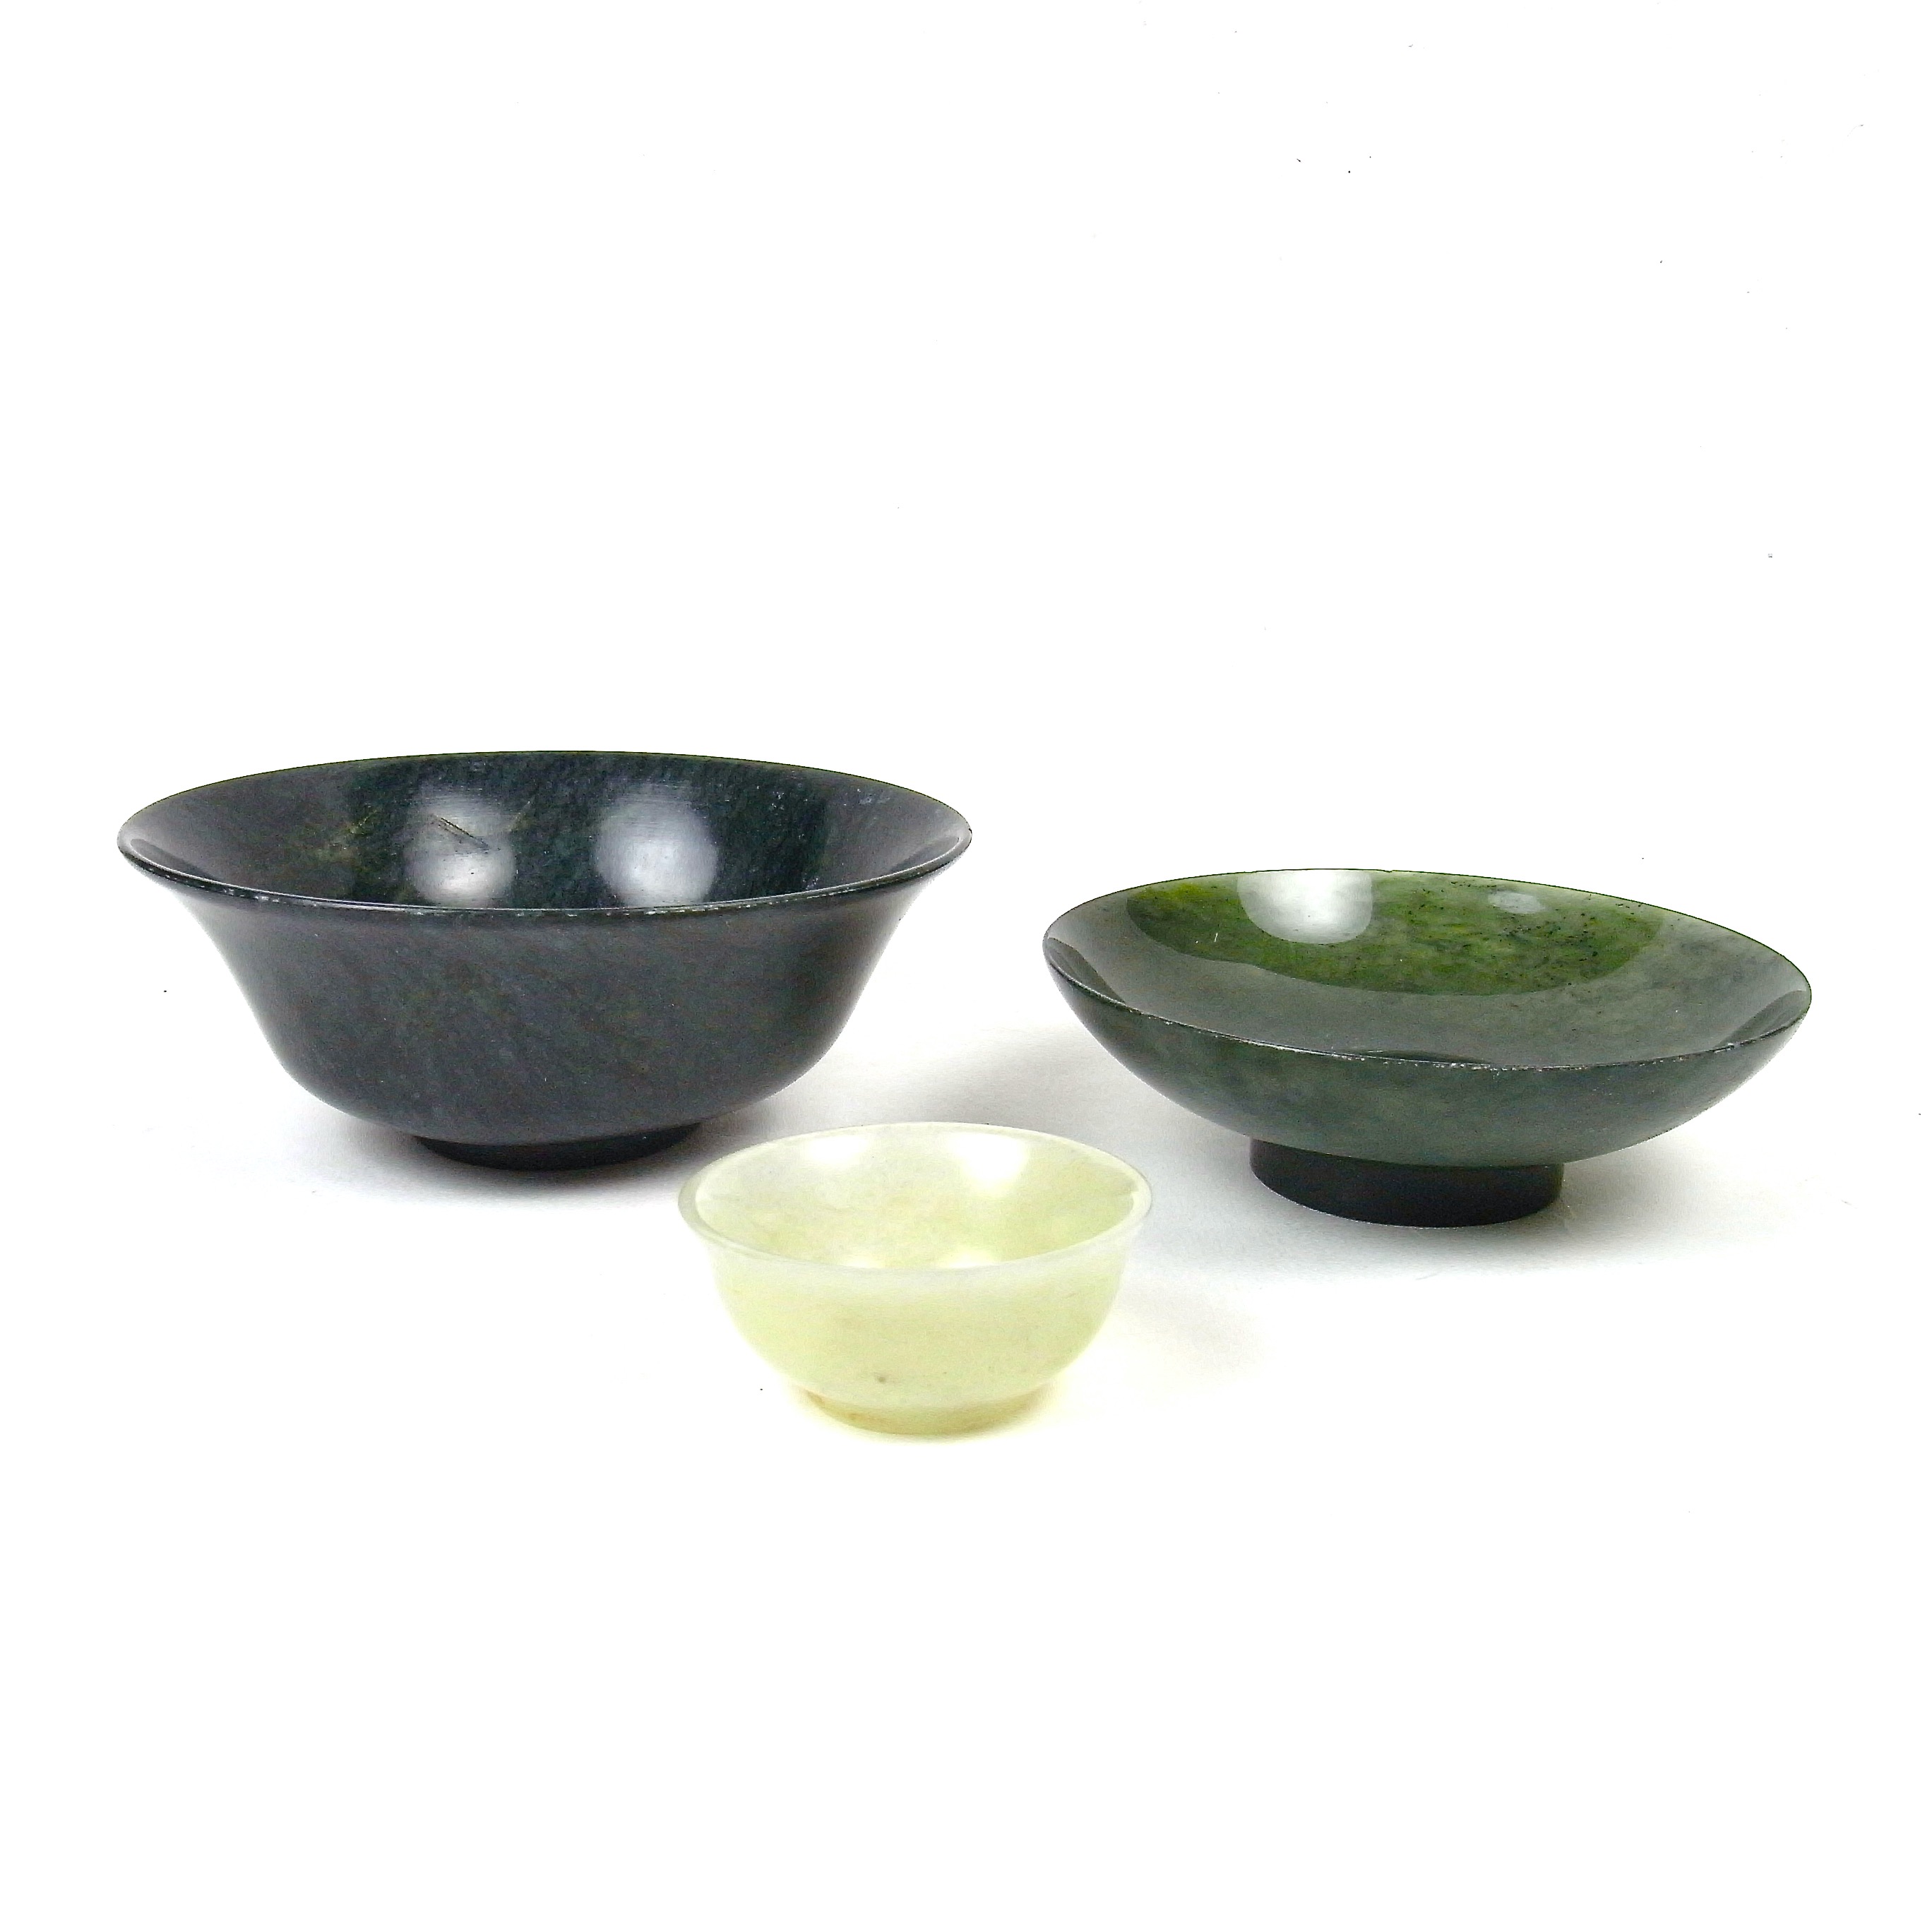 A group of three carved jade and greenstone bowls, 20th century